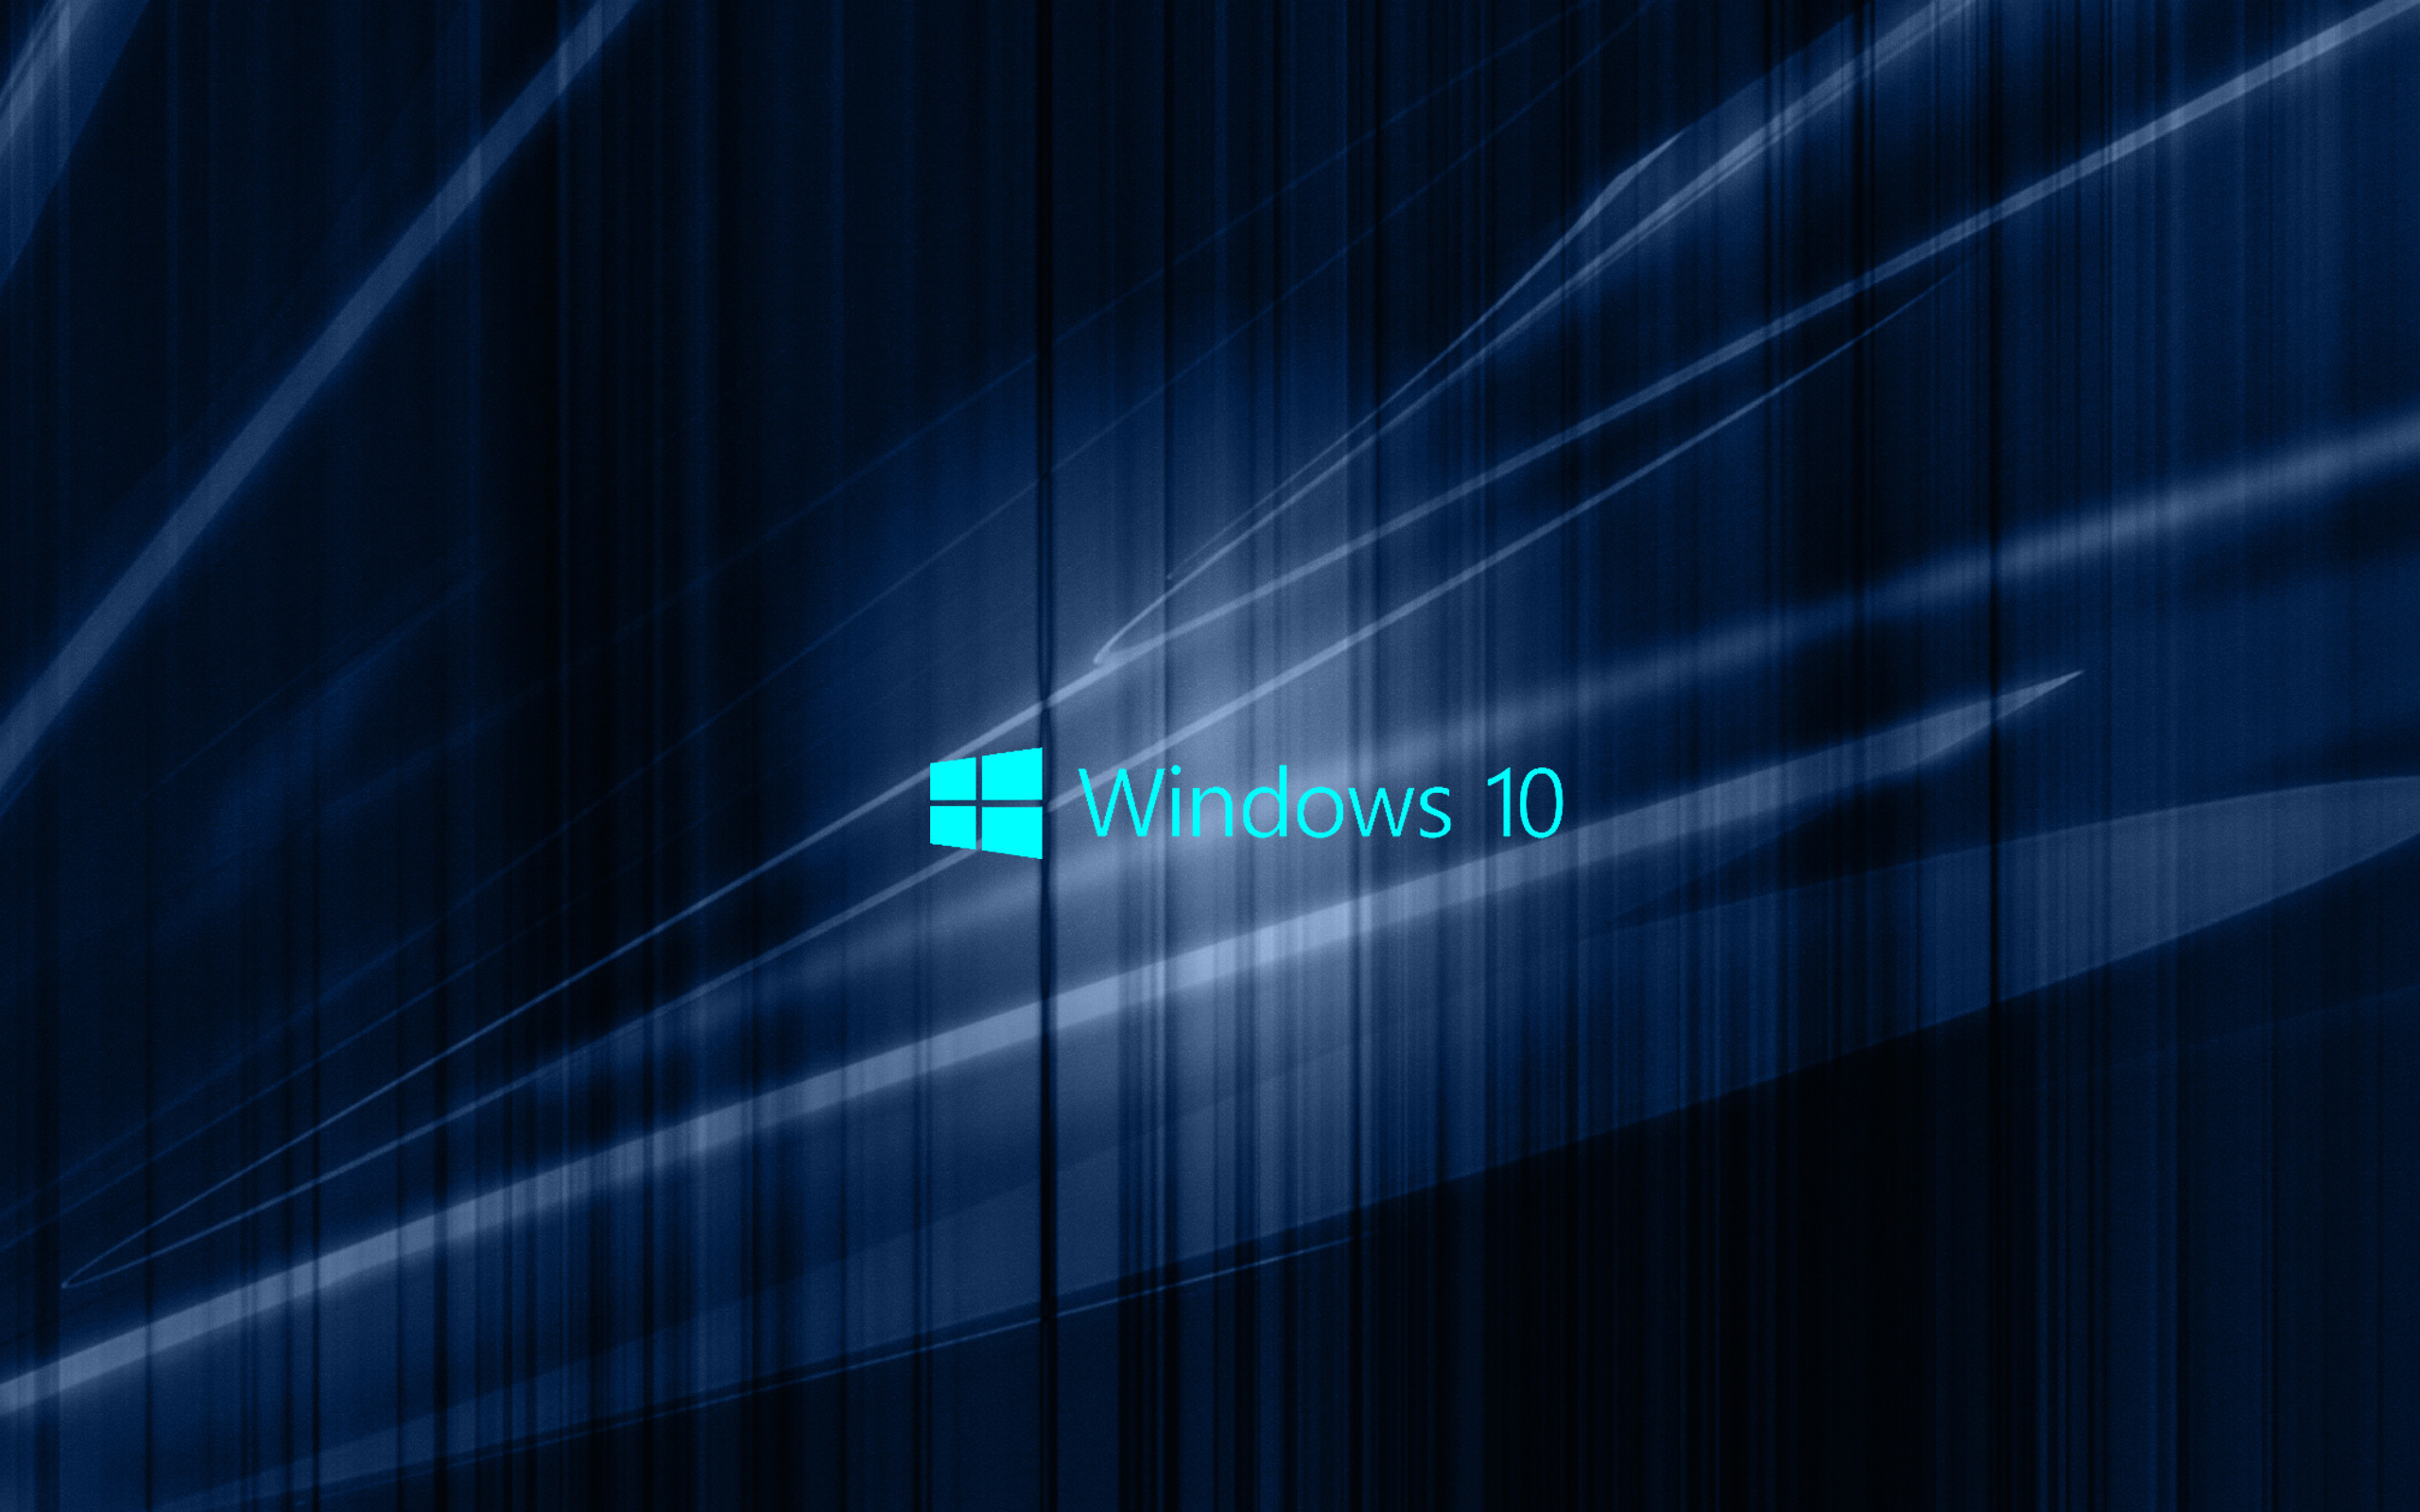 2560x1600 Windows 10 Wallpaper with Blue Abstract Waves | HD Wallpapers for Free